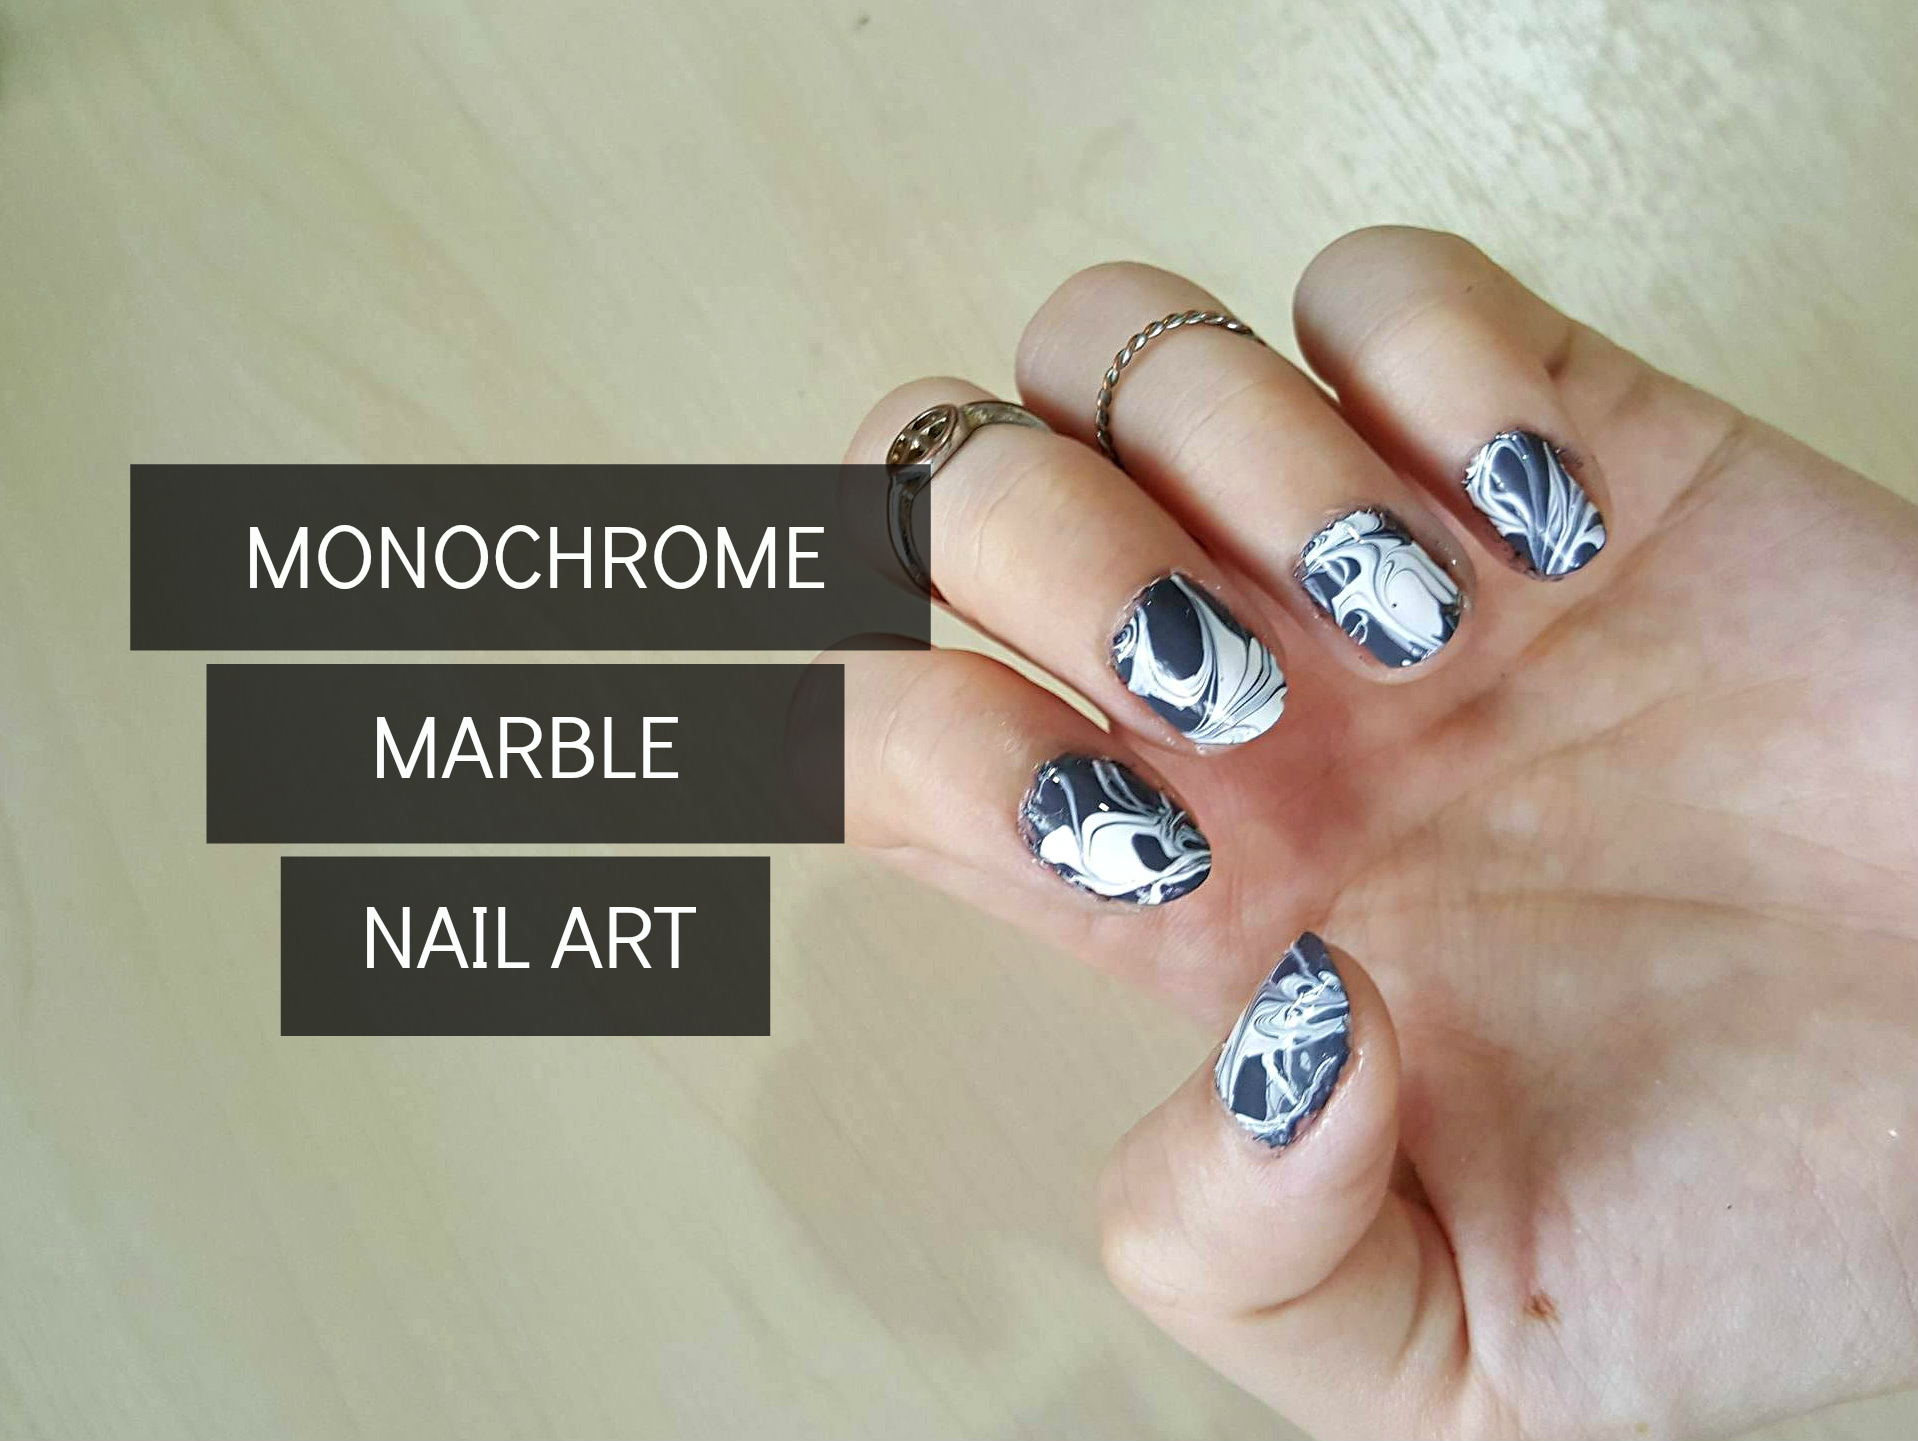 marble nail art science project